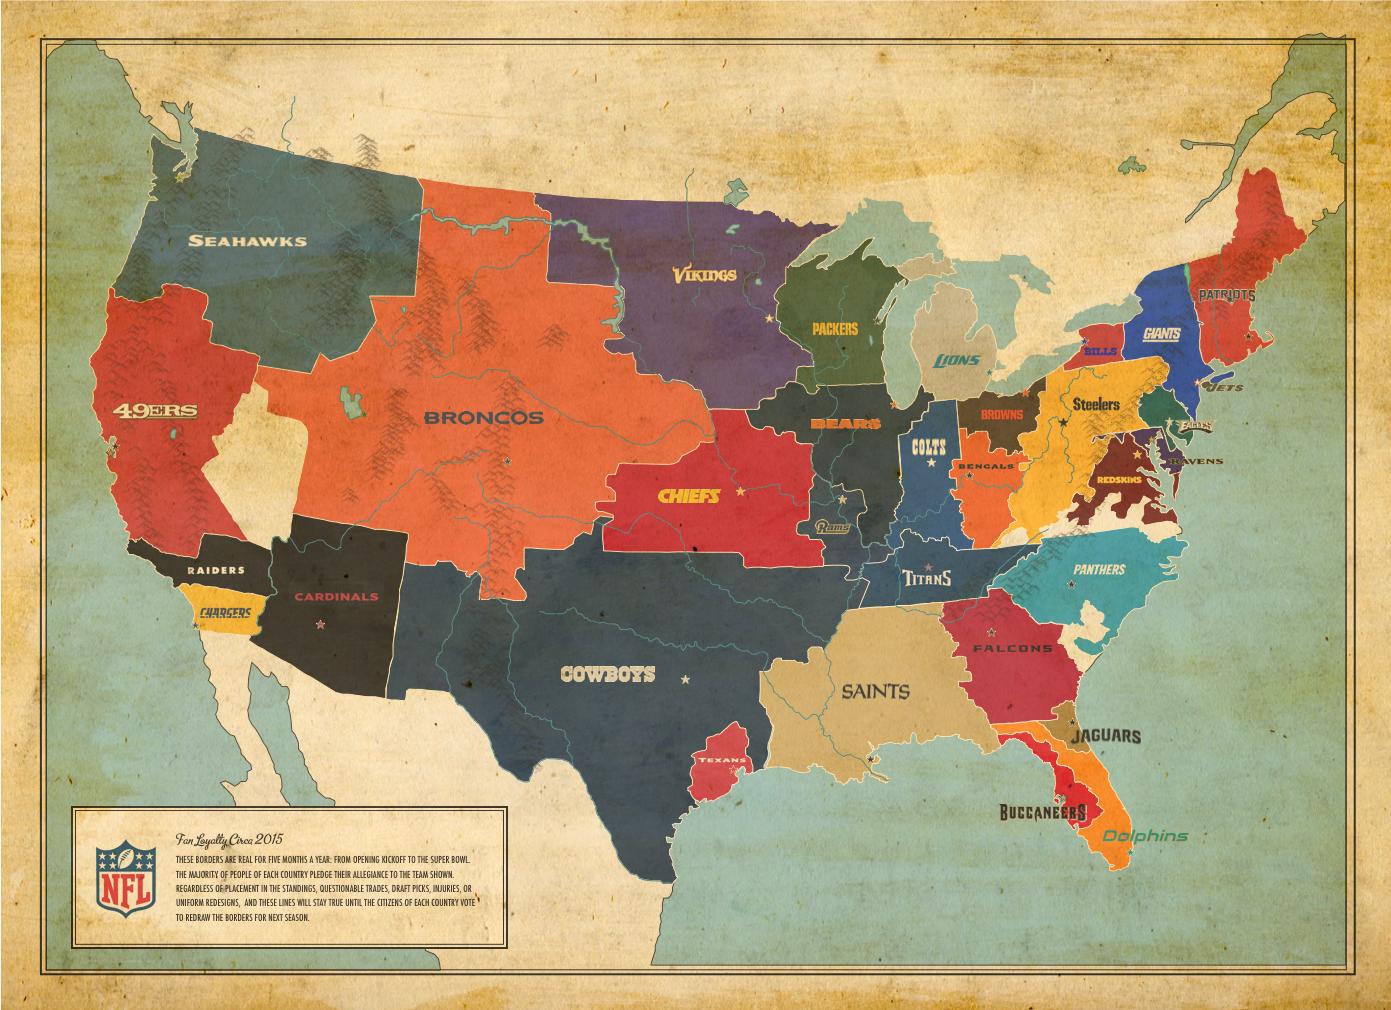 This map is your true guide to NFL fandom in America For The Win